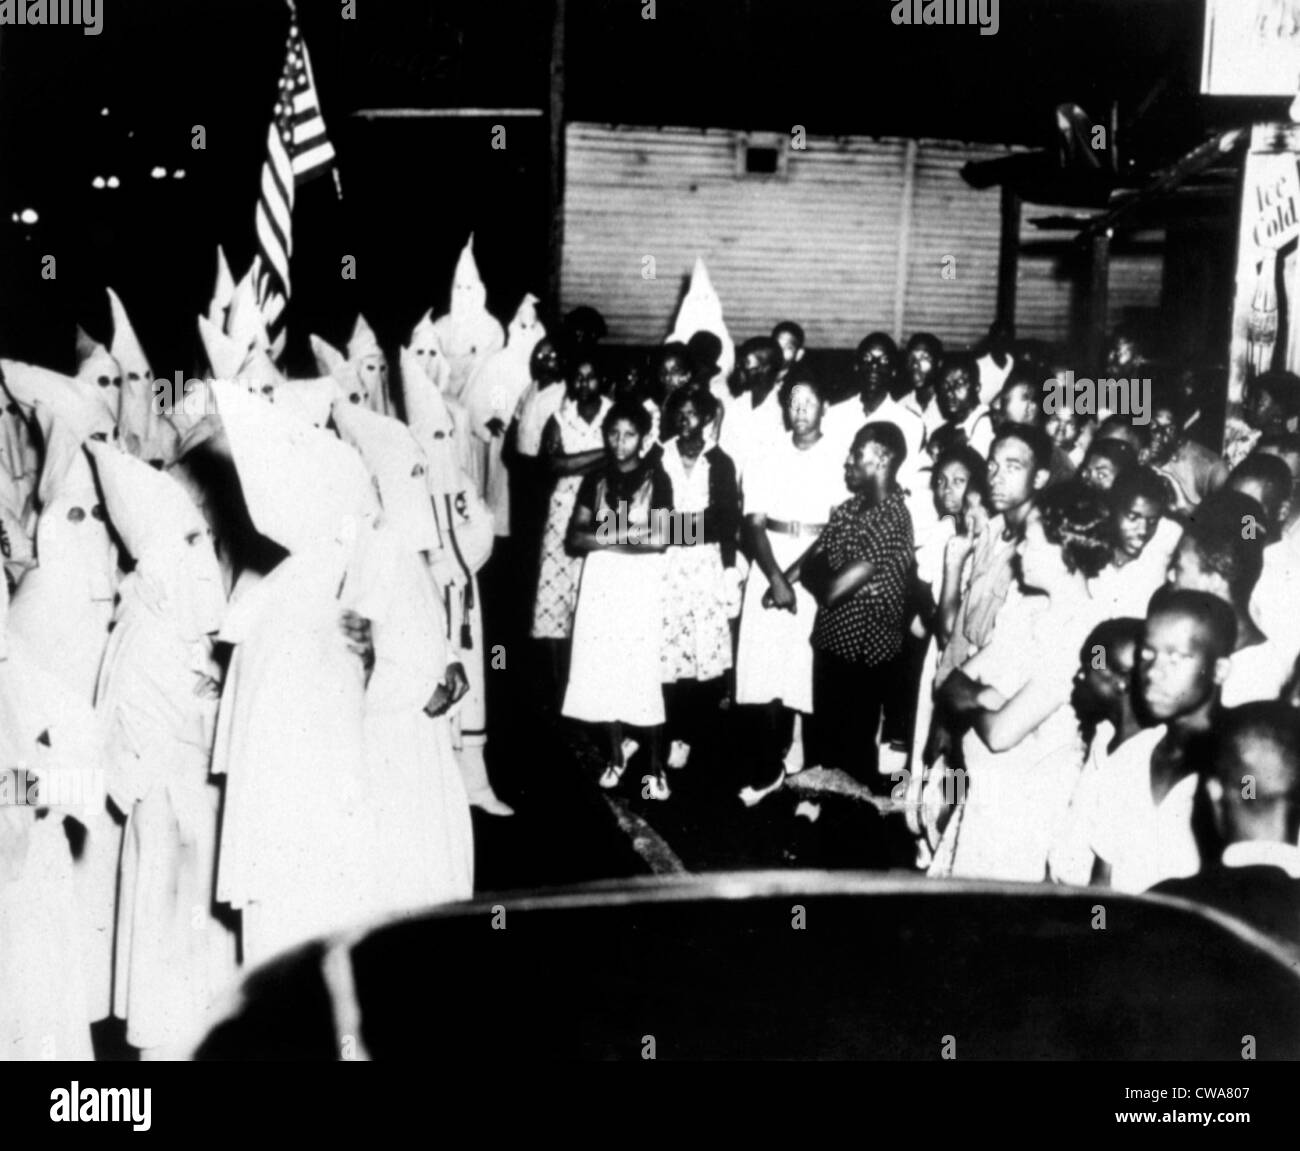 Blacks and Ku Klux Klan in Lakeland,Fl. In 1938. Courtesy: CSU Archives / Everett Collection Stock Photo